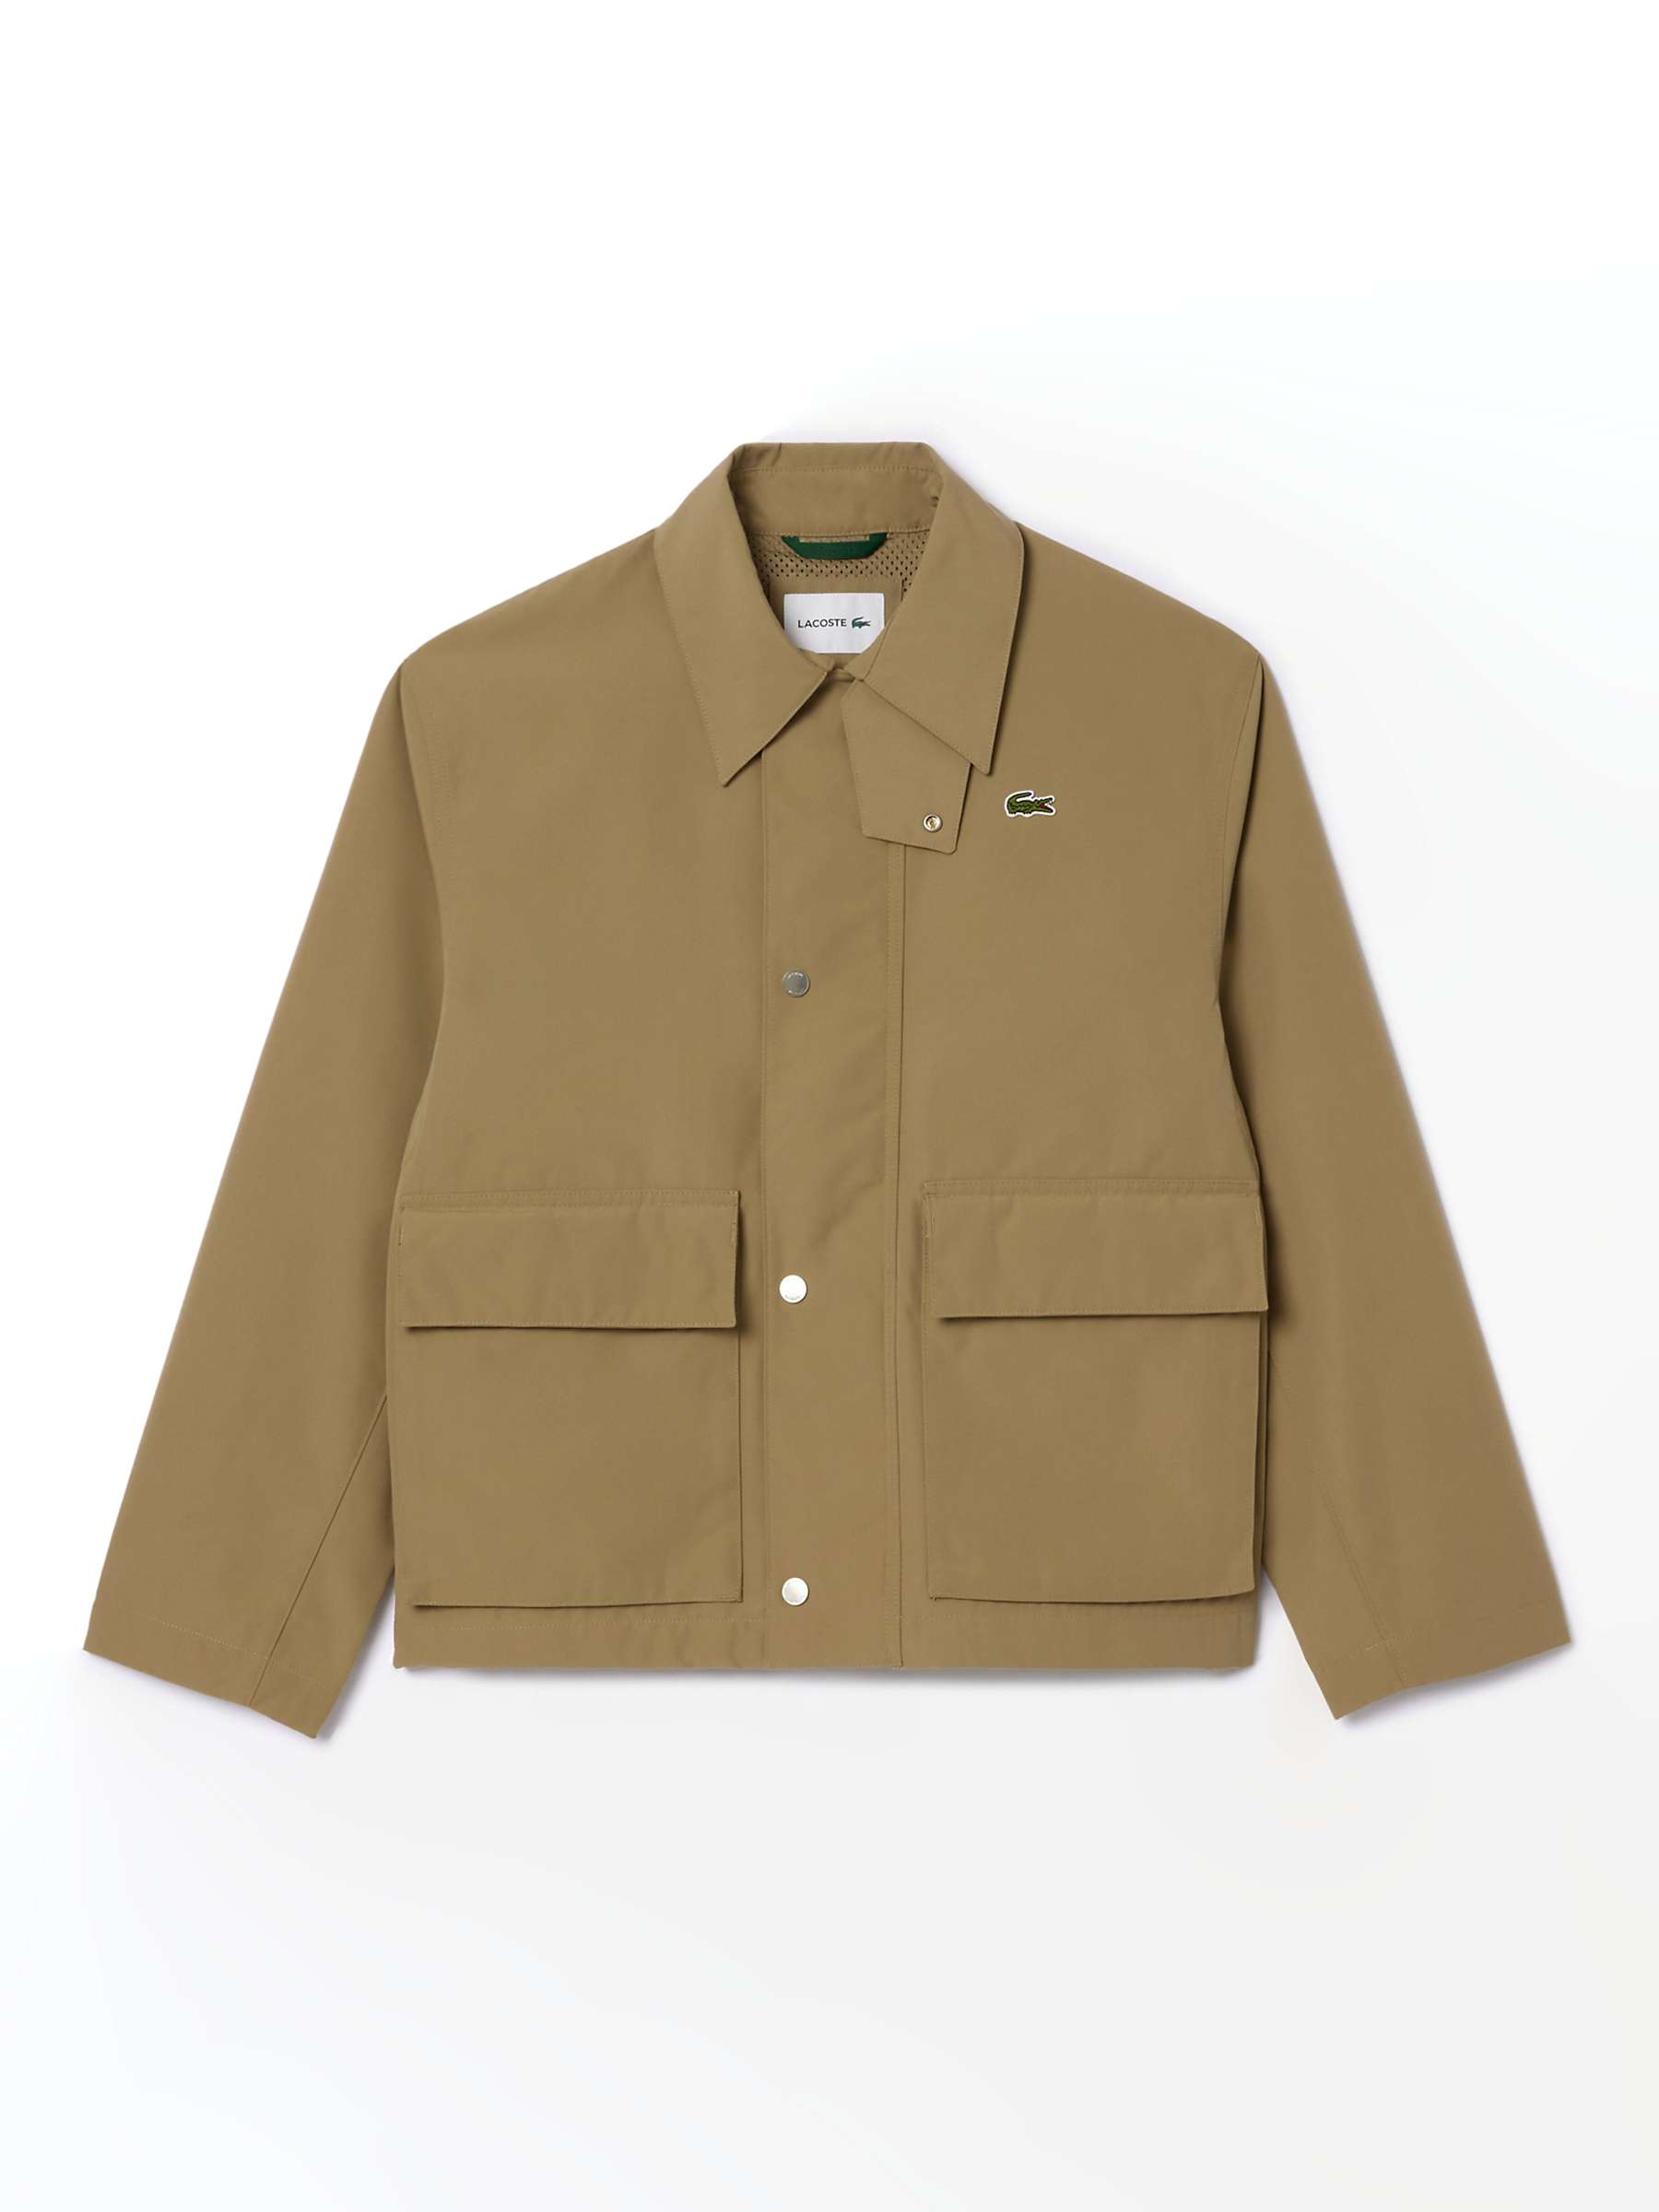 Buy Lacoste Core Essential Snap Down Jacket, Brown Online at johnlewis.com